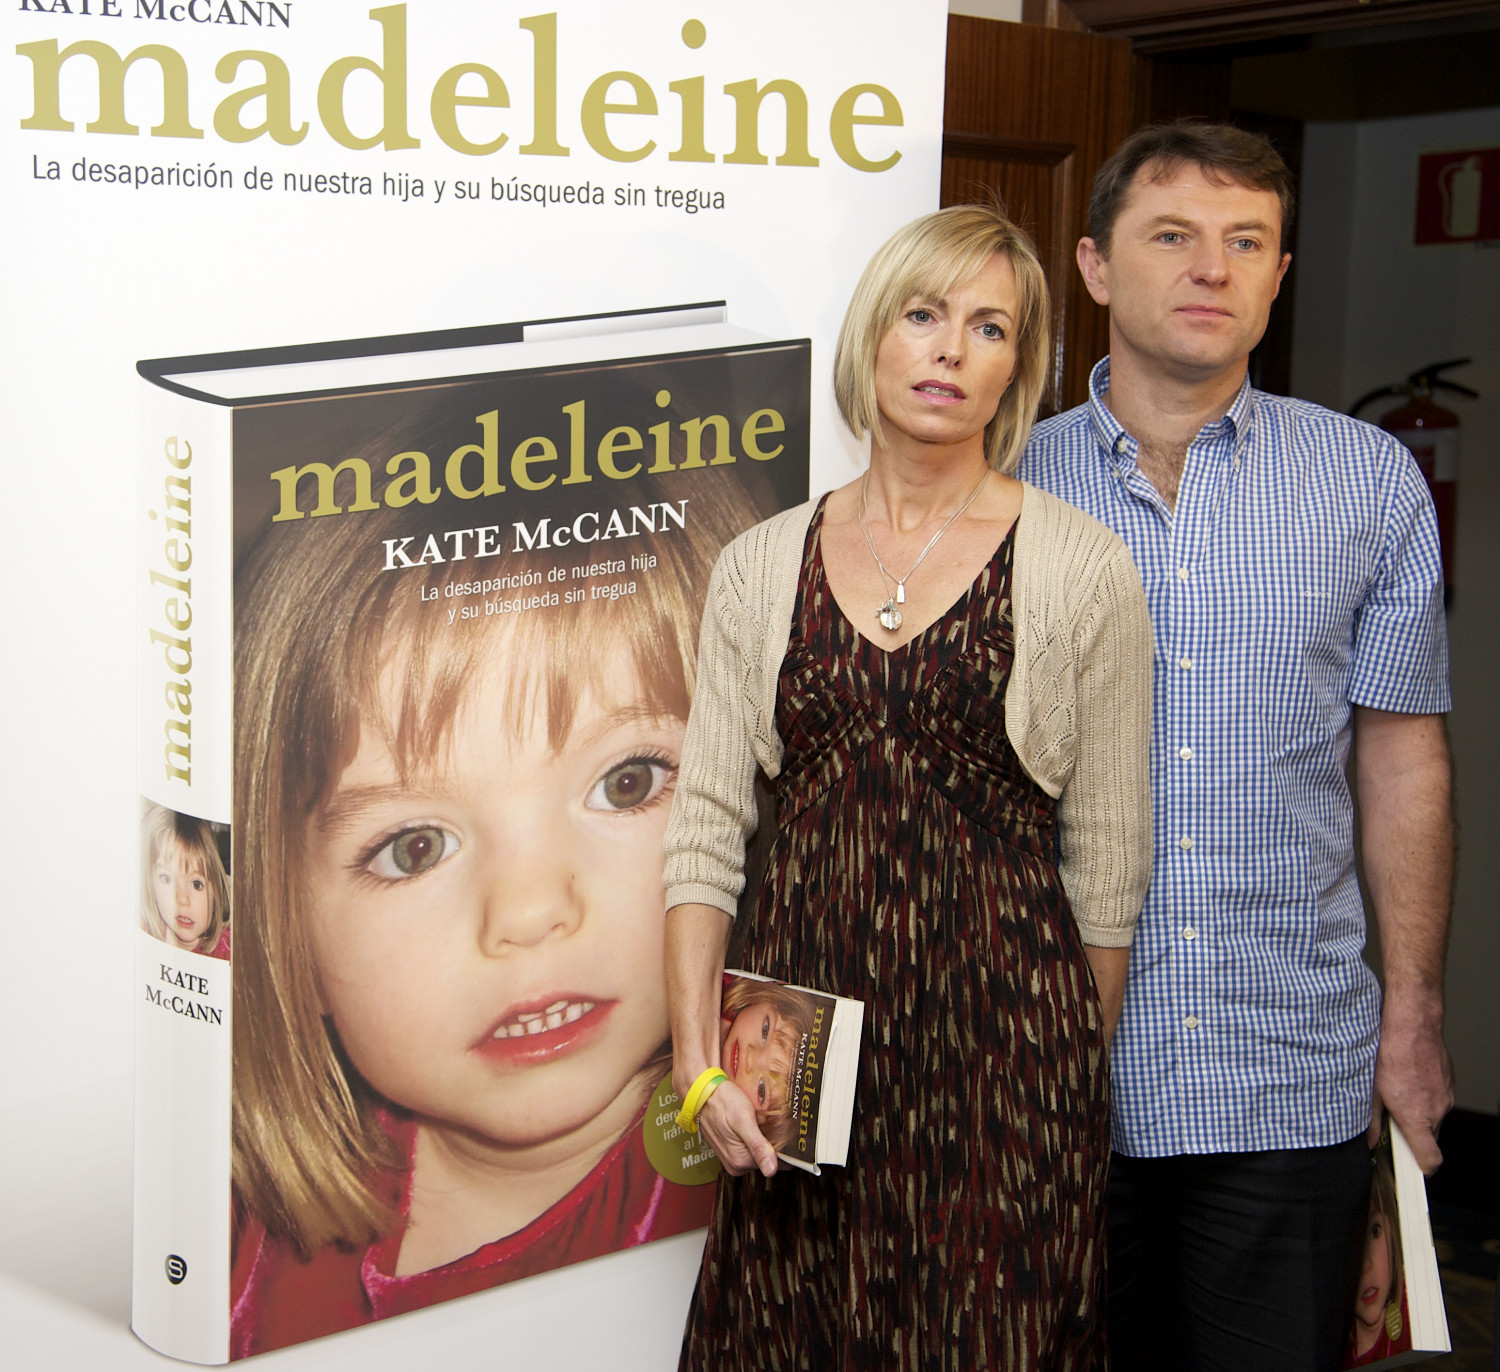 Material Evidence Exists That Missing Madeleine McCann Died, German Official Says